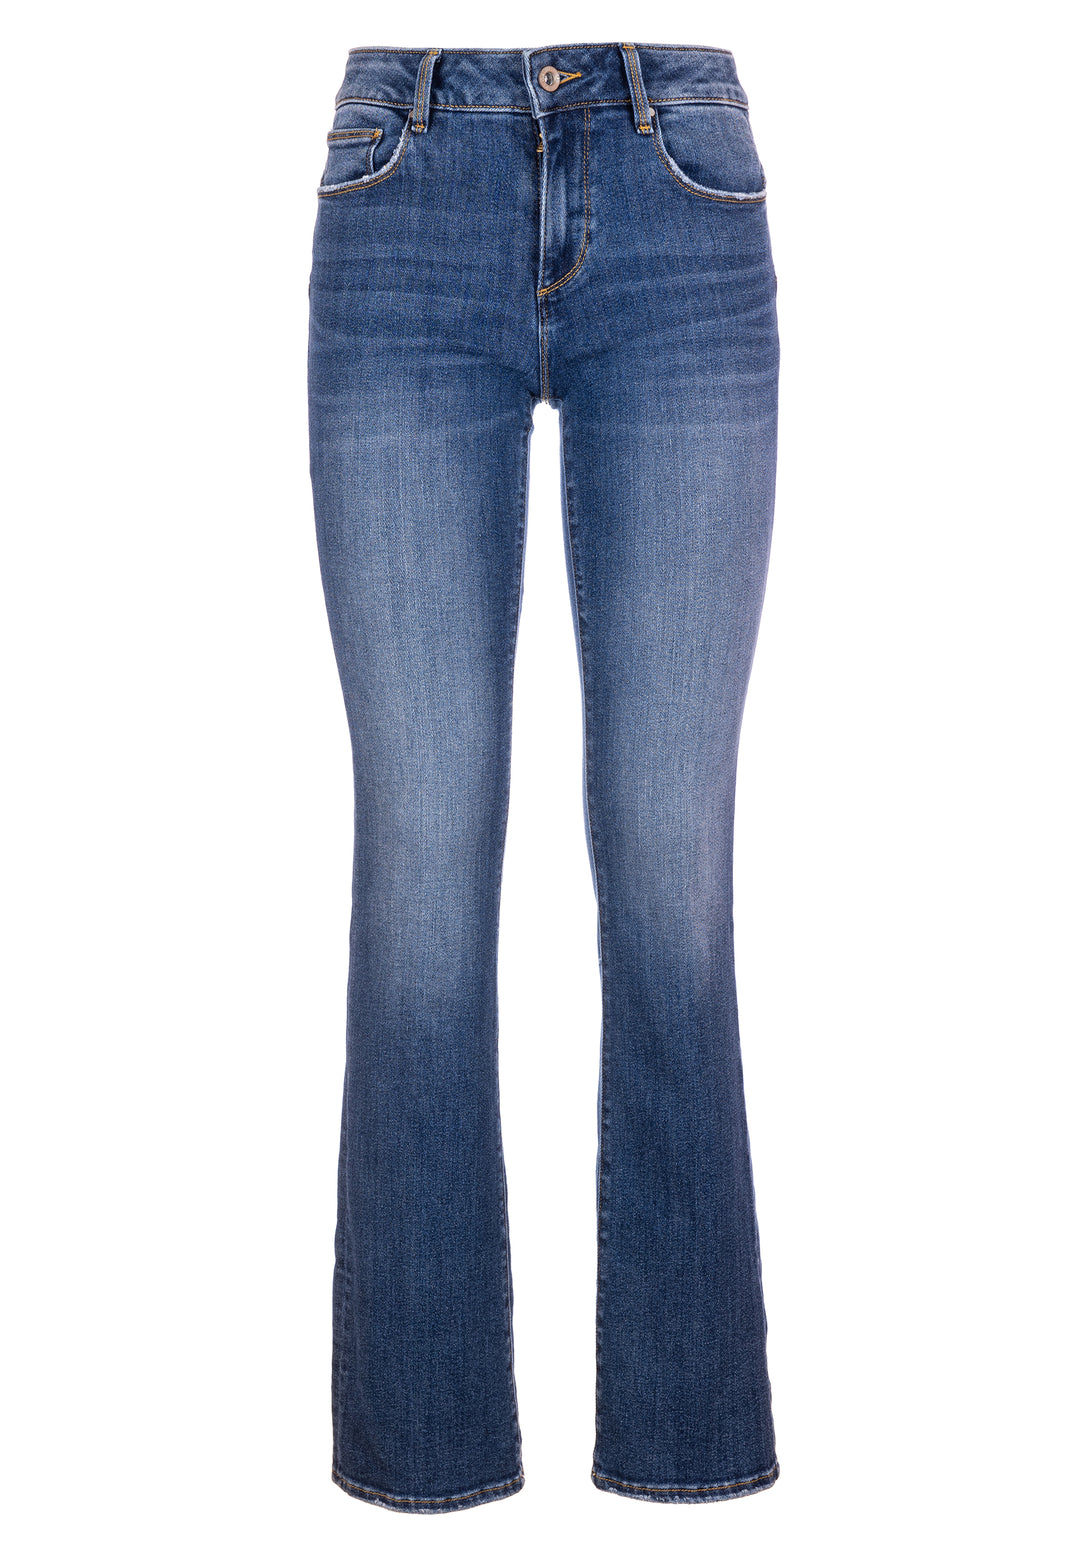 Jeans bootcut with push up effect made in denim with middle wash